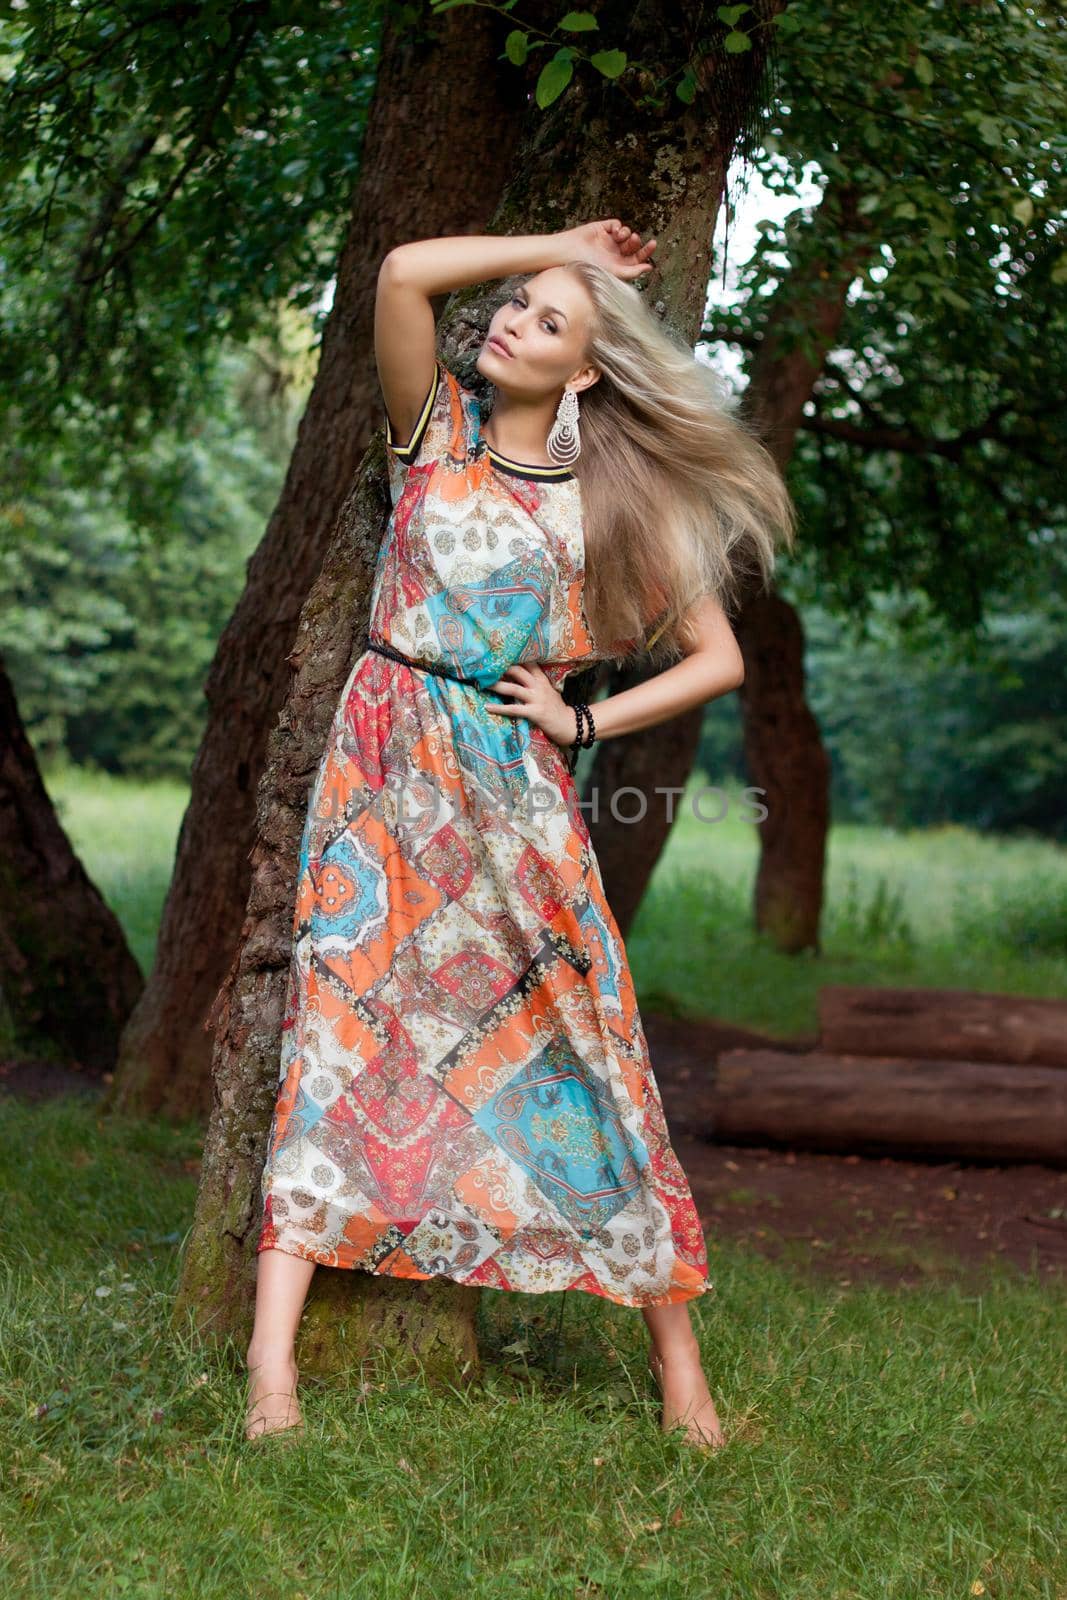 Sexy woman outdoor with nice colorful dress in garden